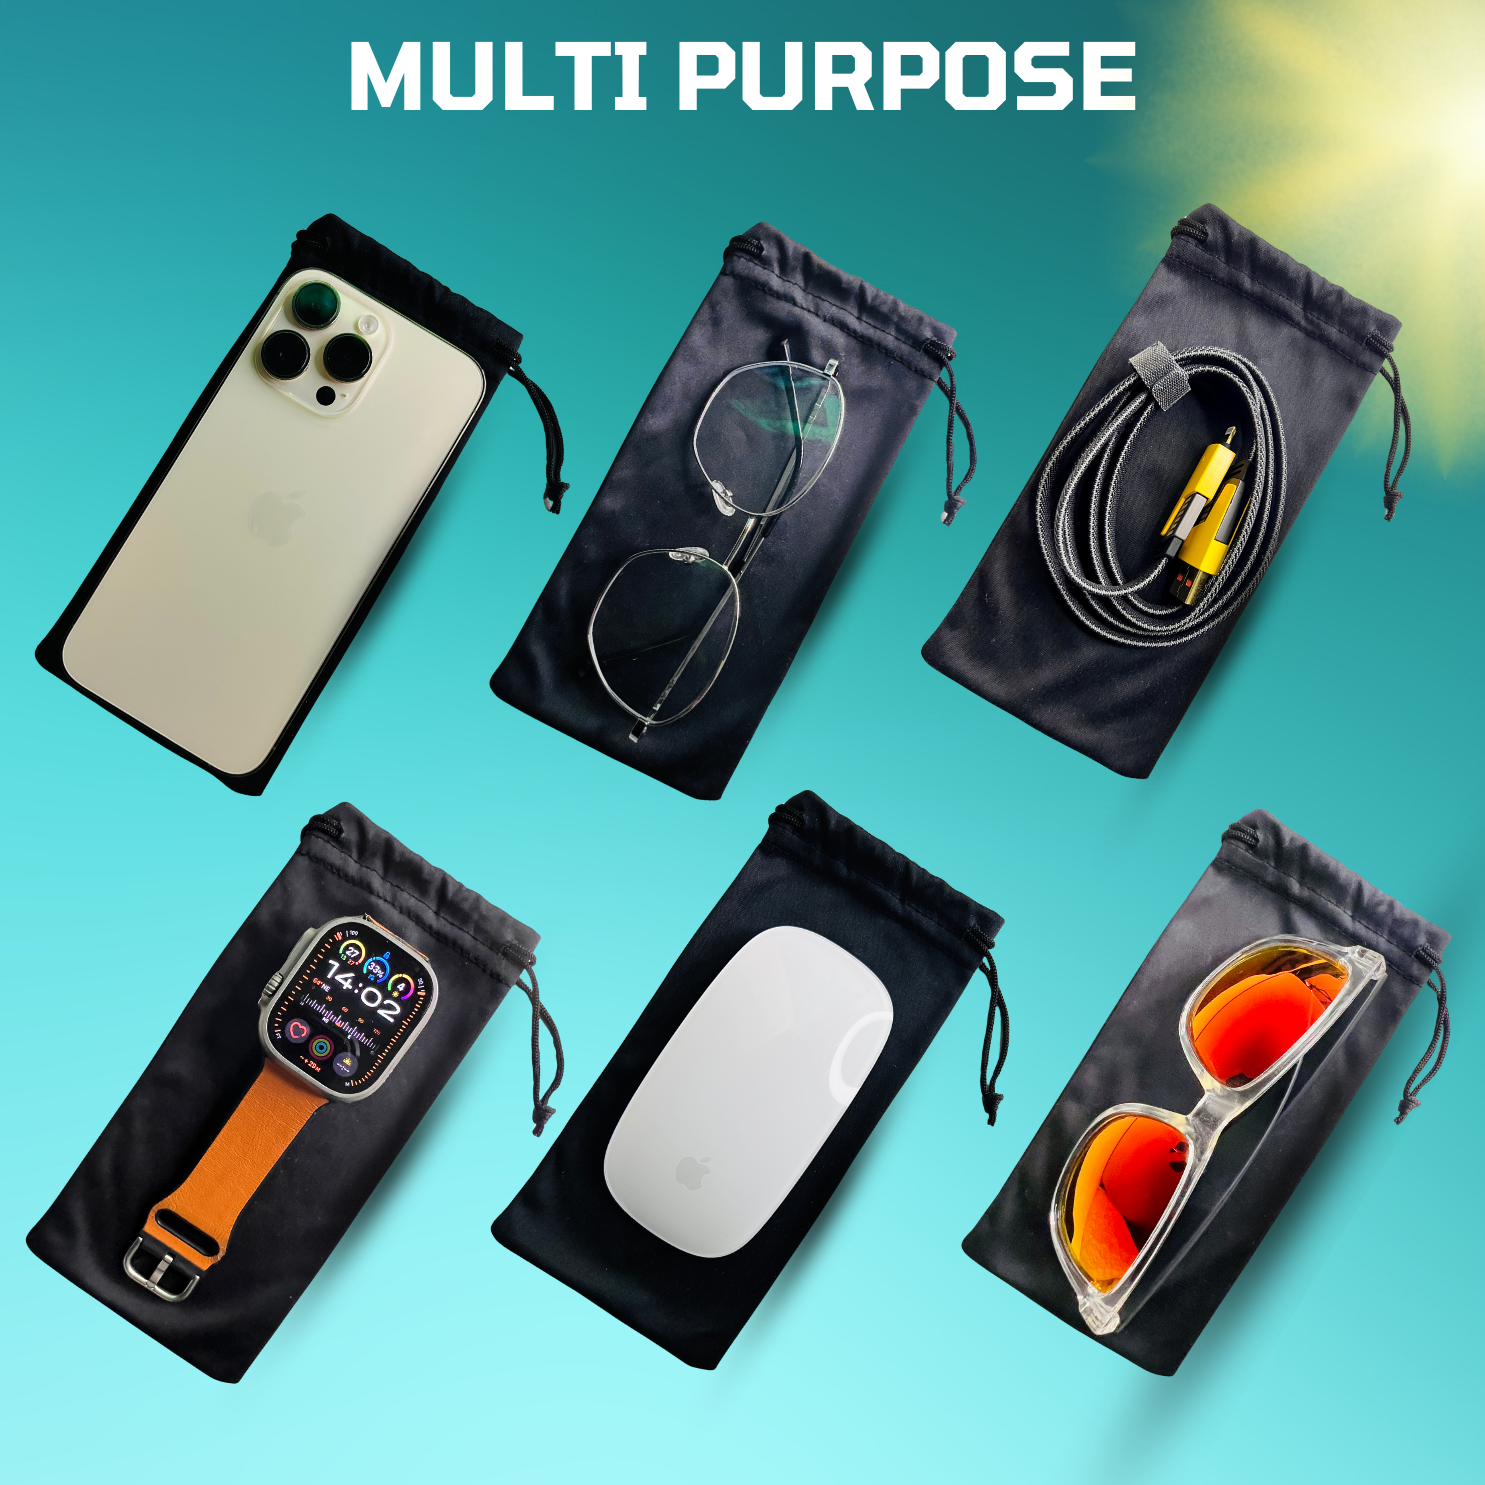 Pouch bag for sunglasses and multi purpose